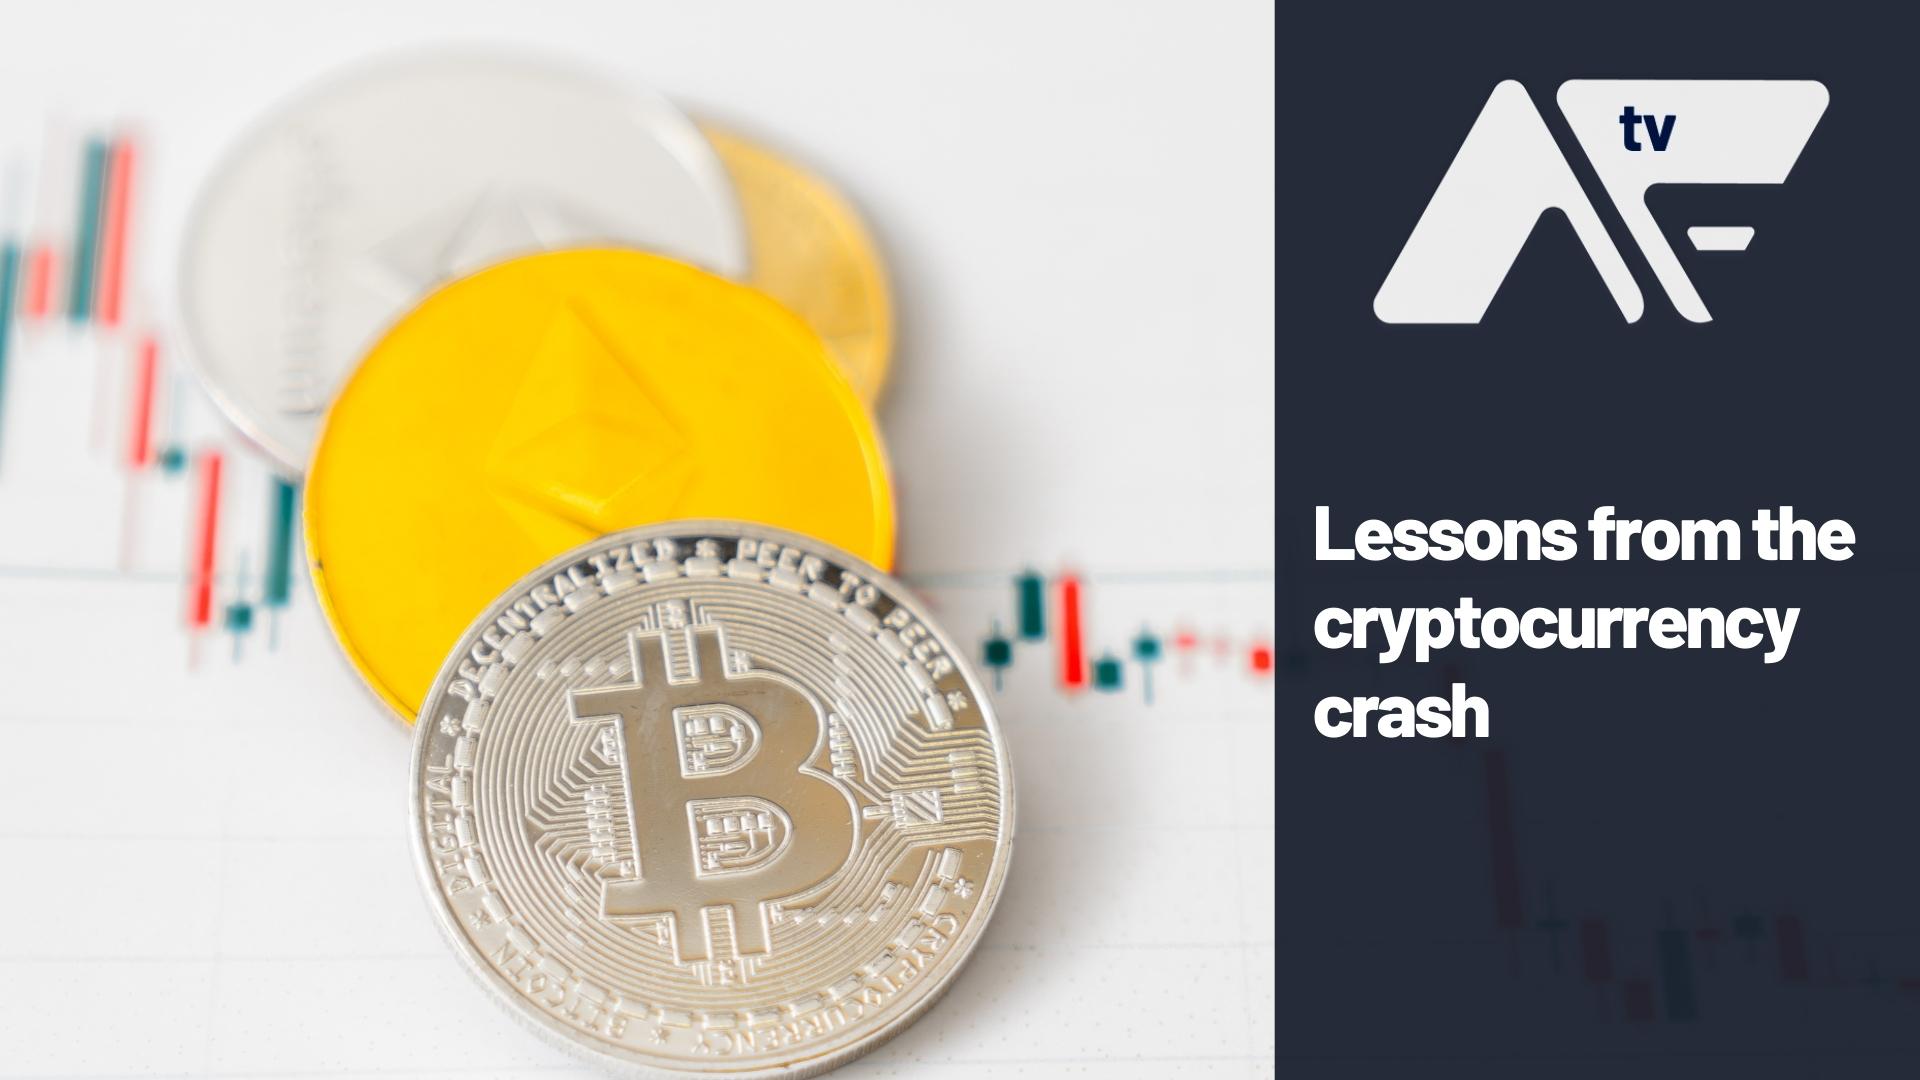 AF TV – Crypto Crash: Lessons to Learn From the Carnage